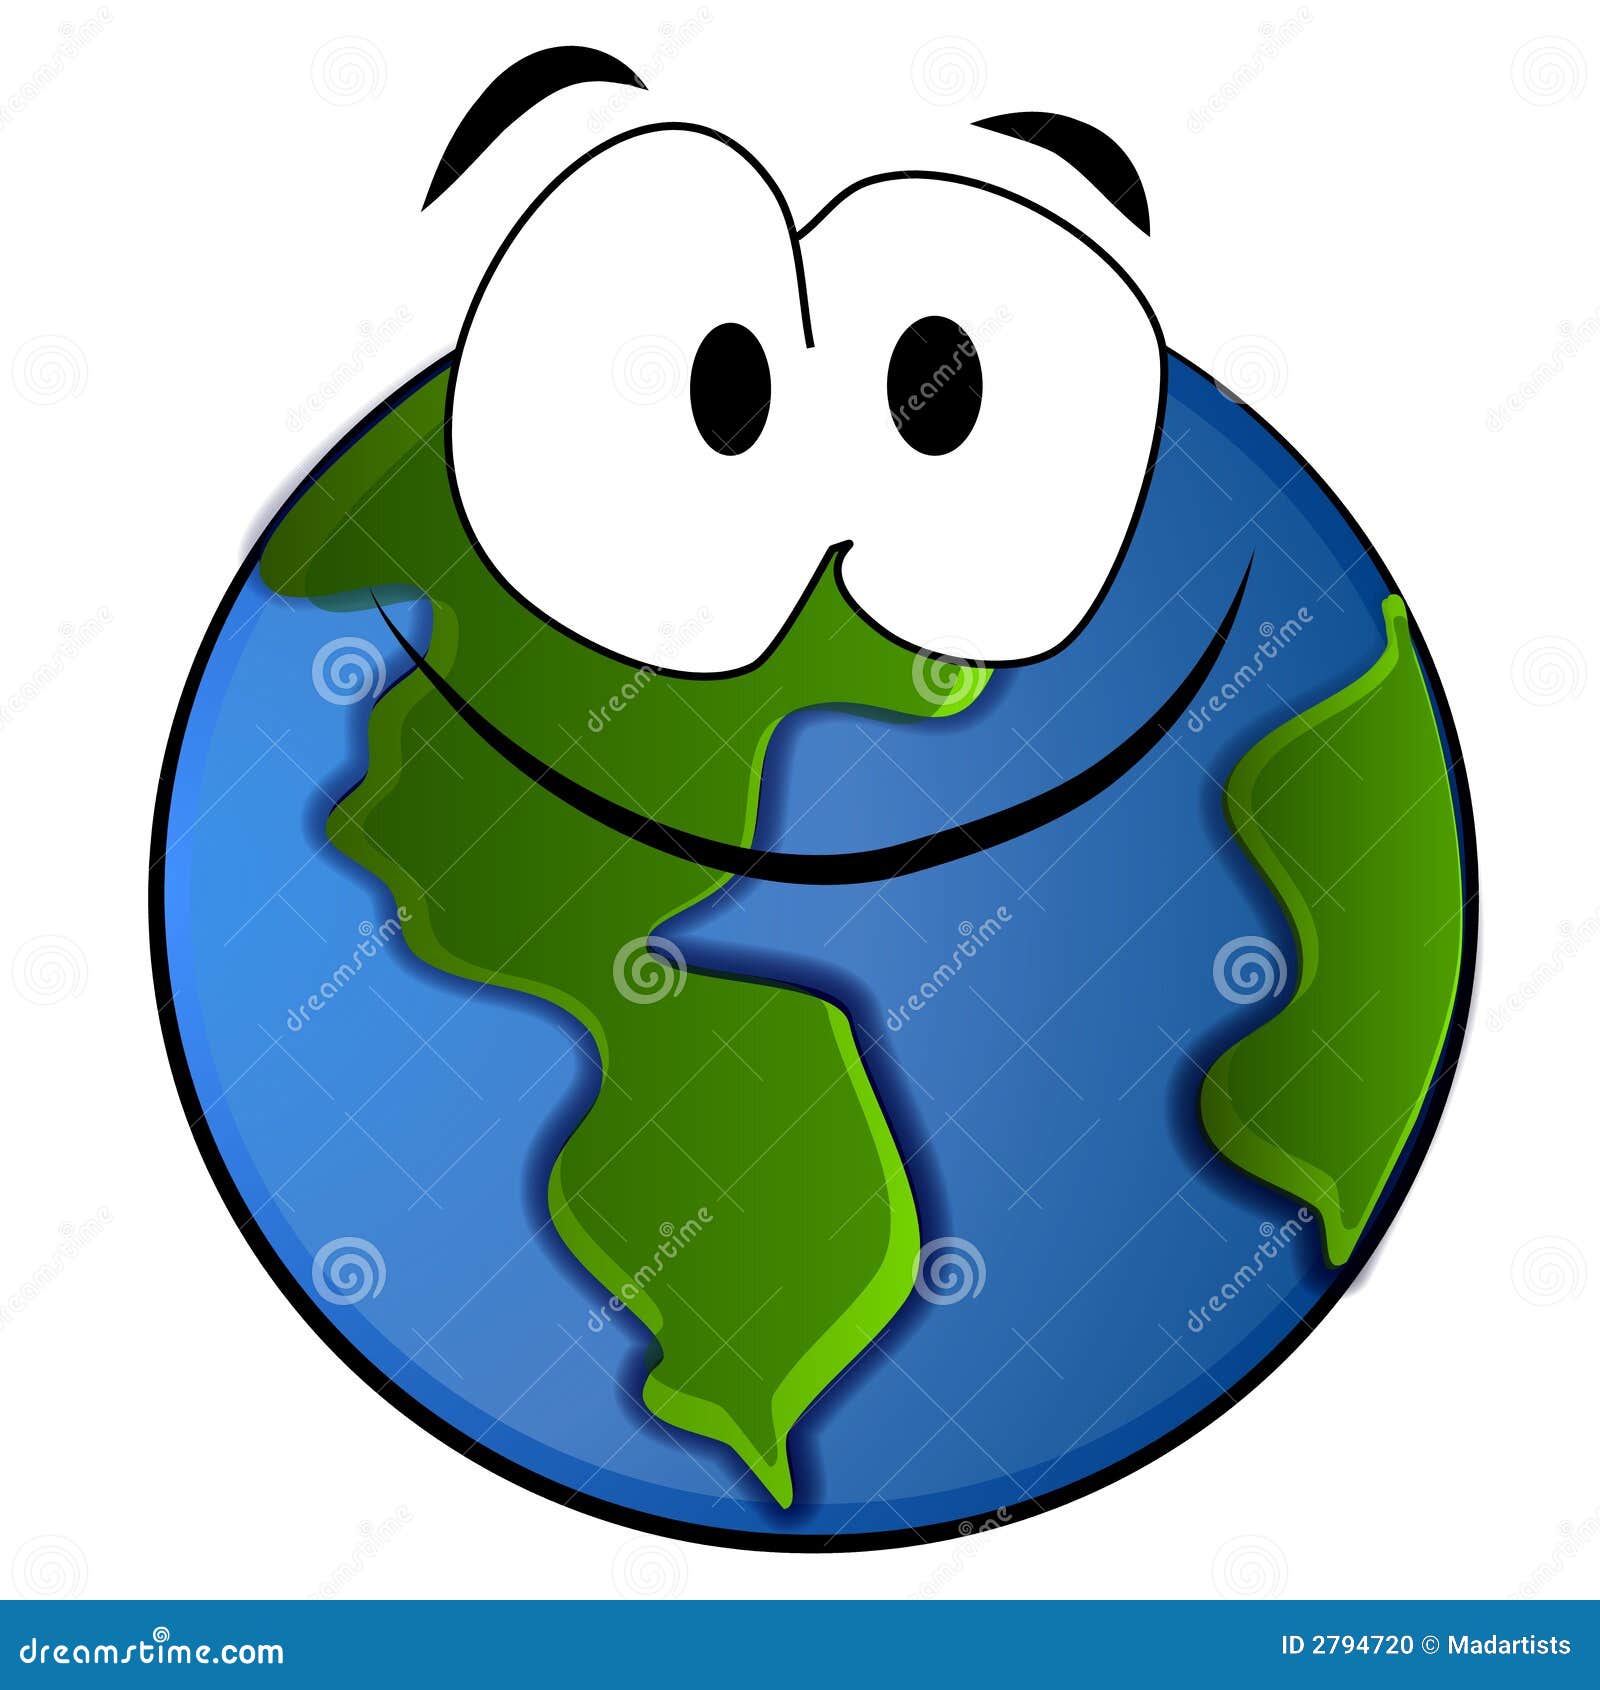 earth clipart moving - photo #22